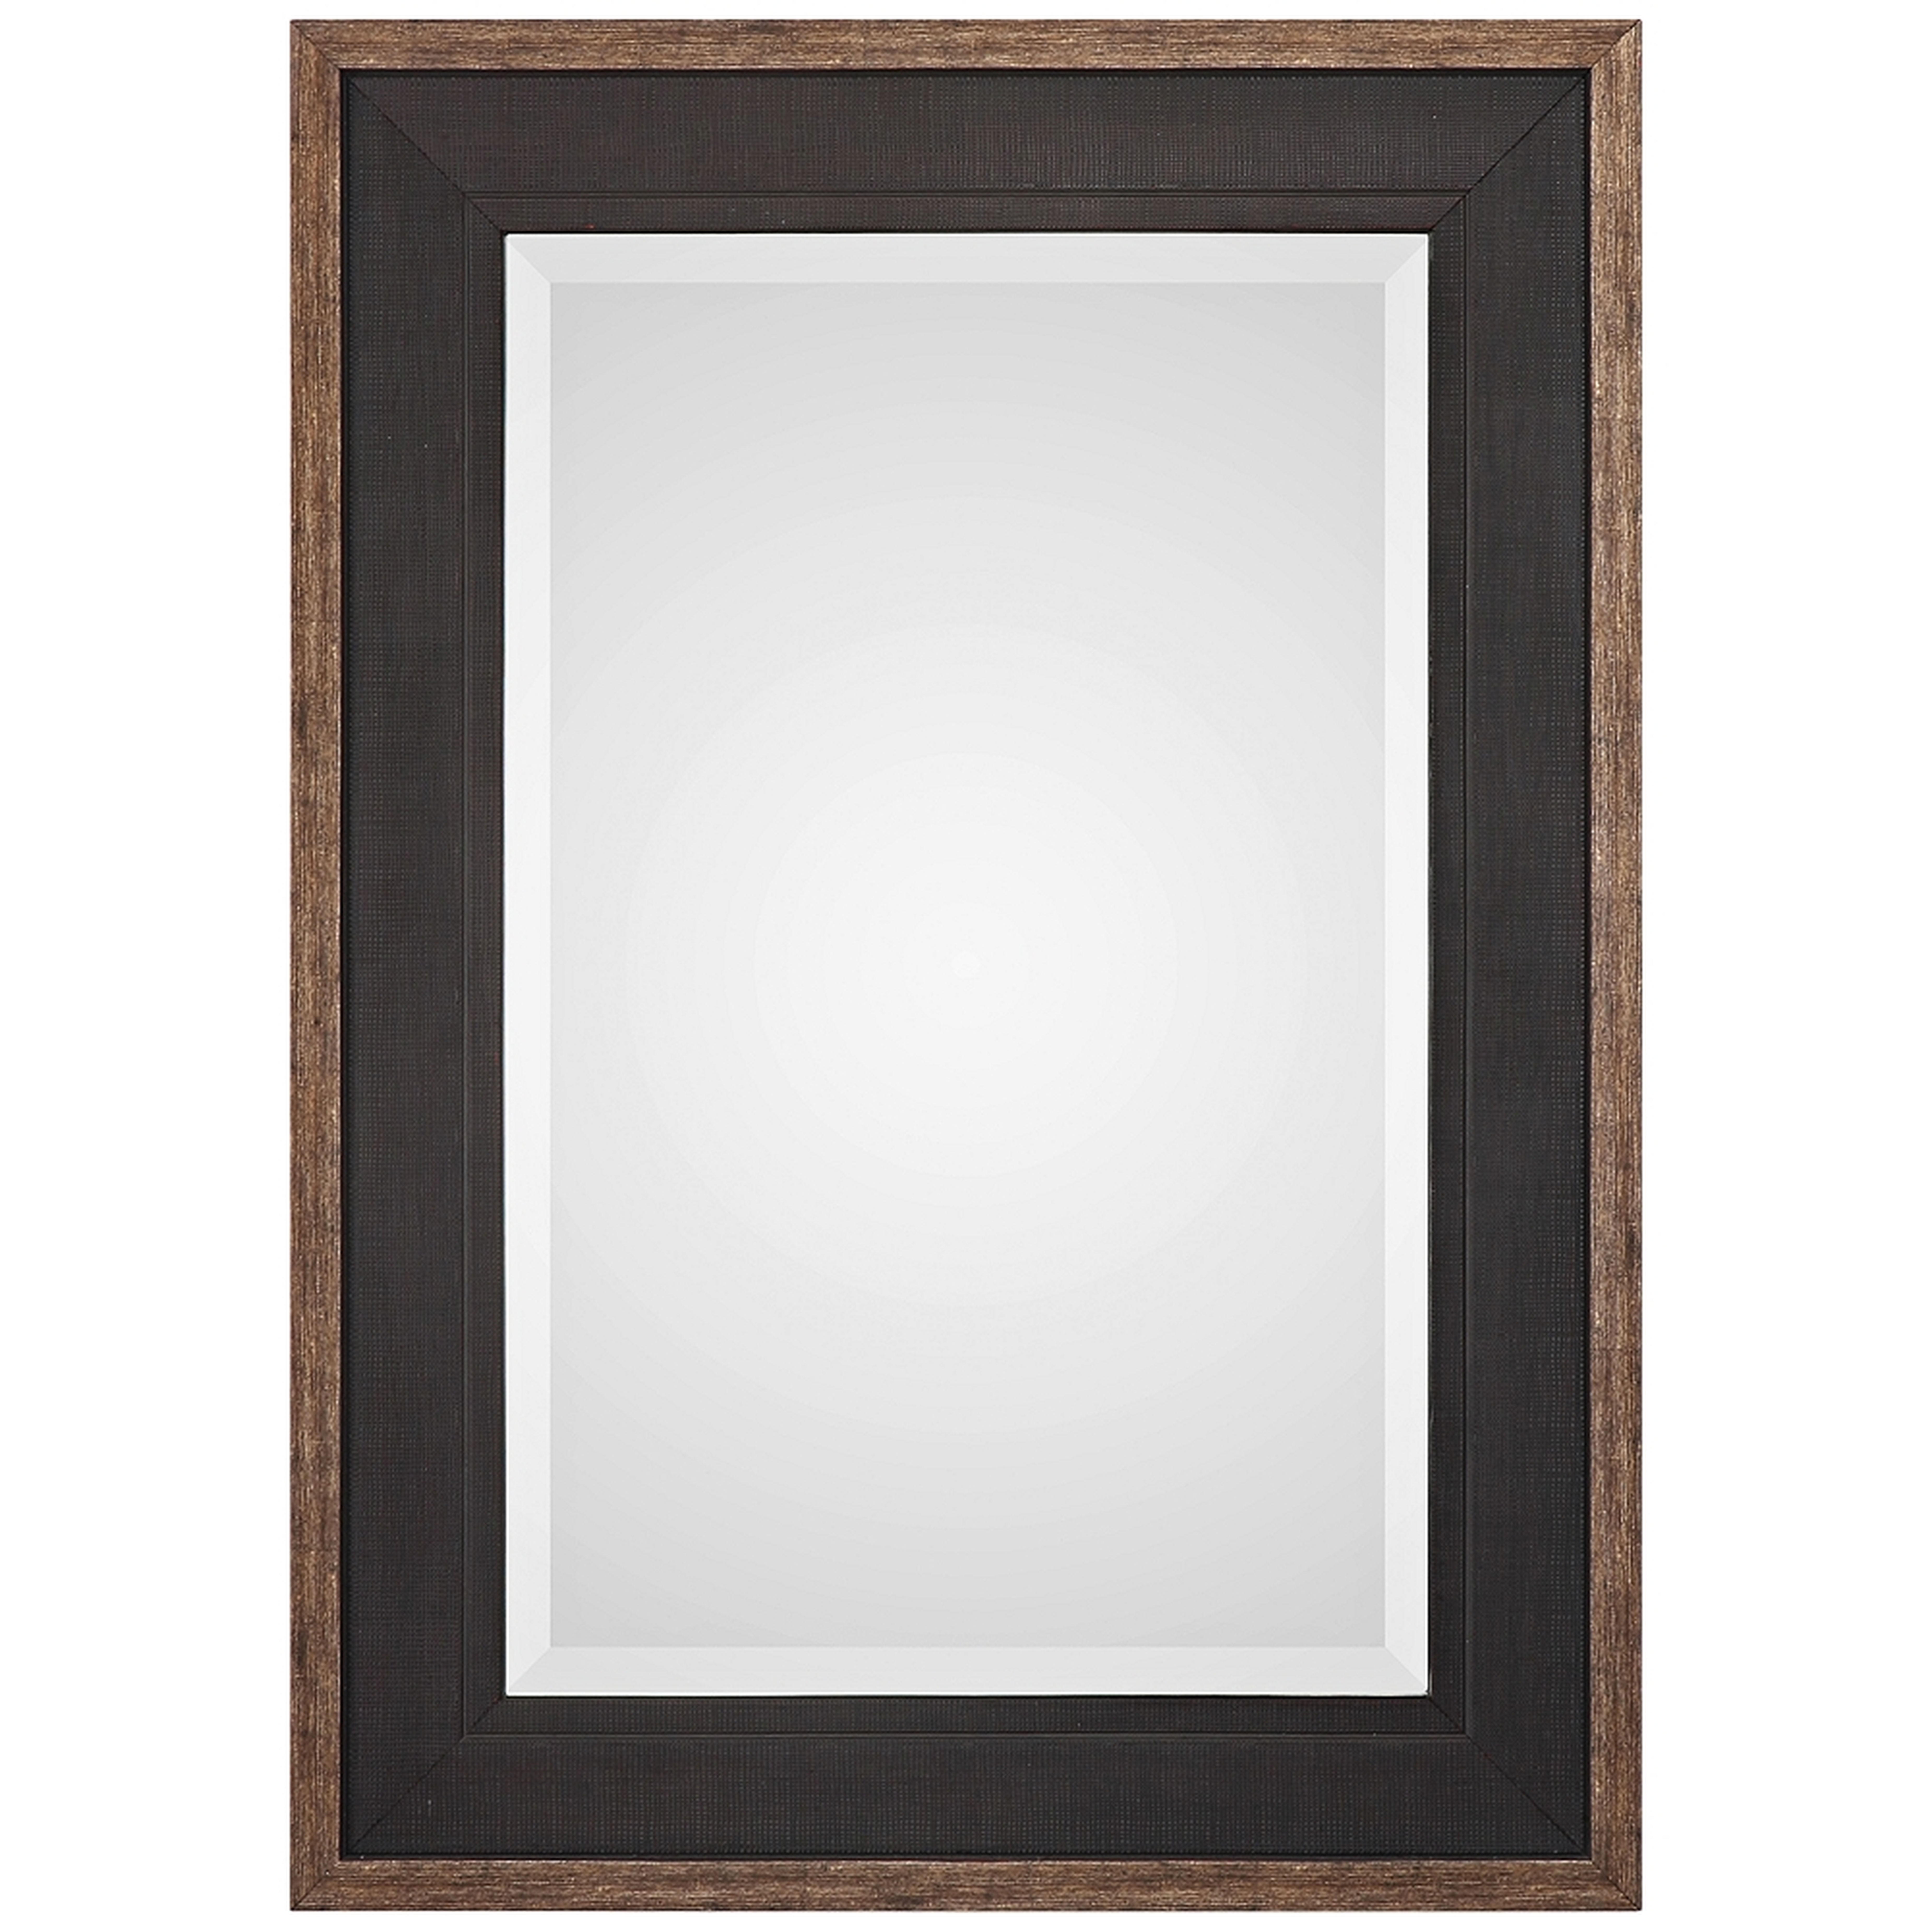 Uttermost Staveley Rustic Black 30" x 42" Wall Mirror - Style # 58J71 - Lamps Plus